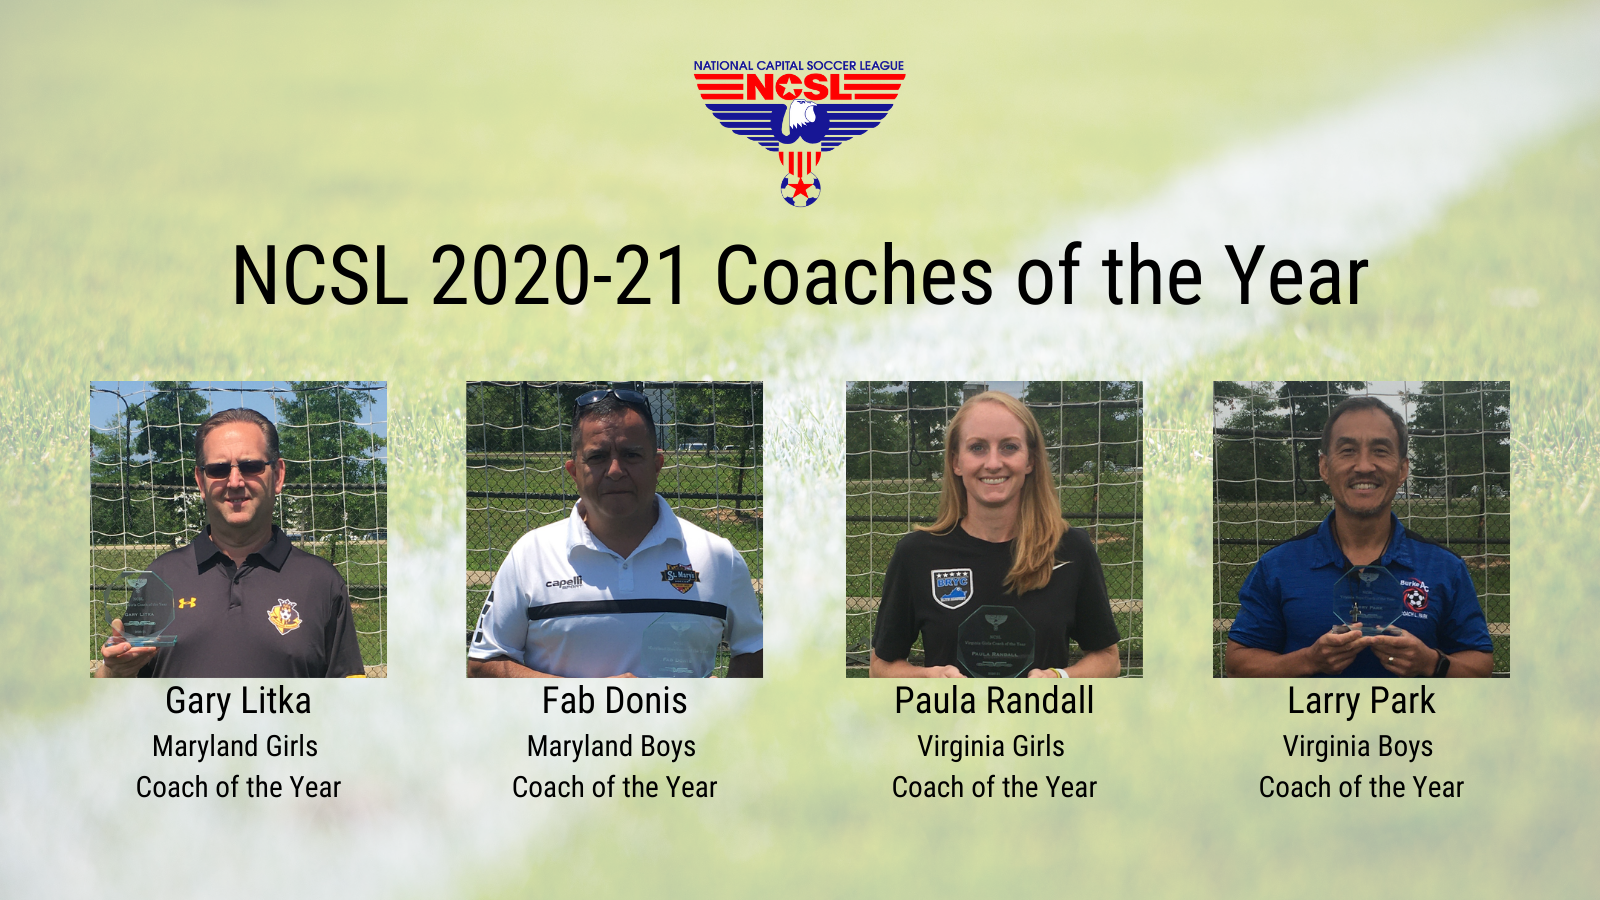 NCSL 2020-21 Coach of the Year Awards